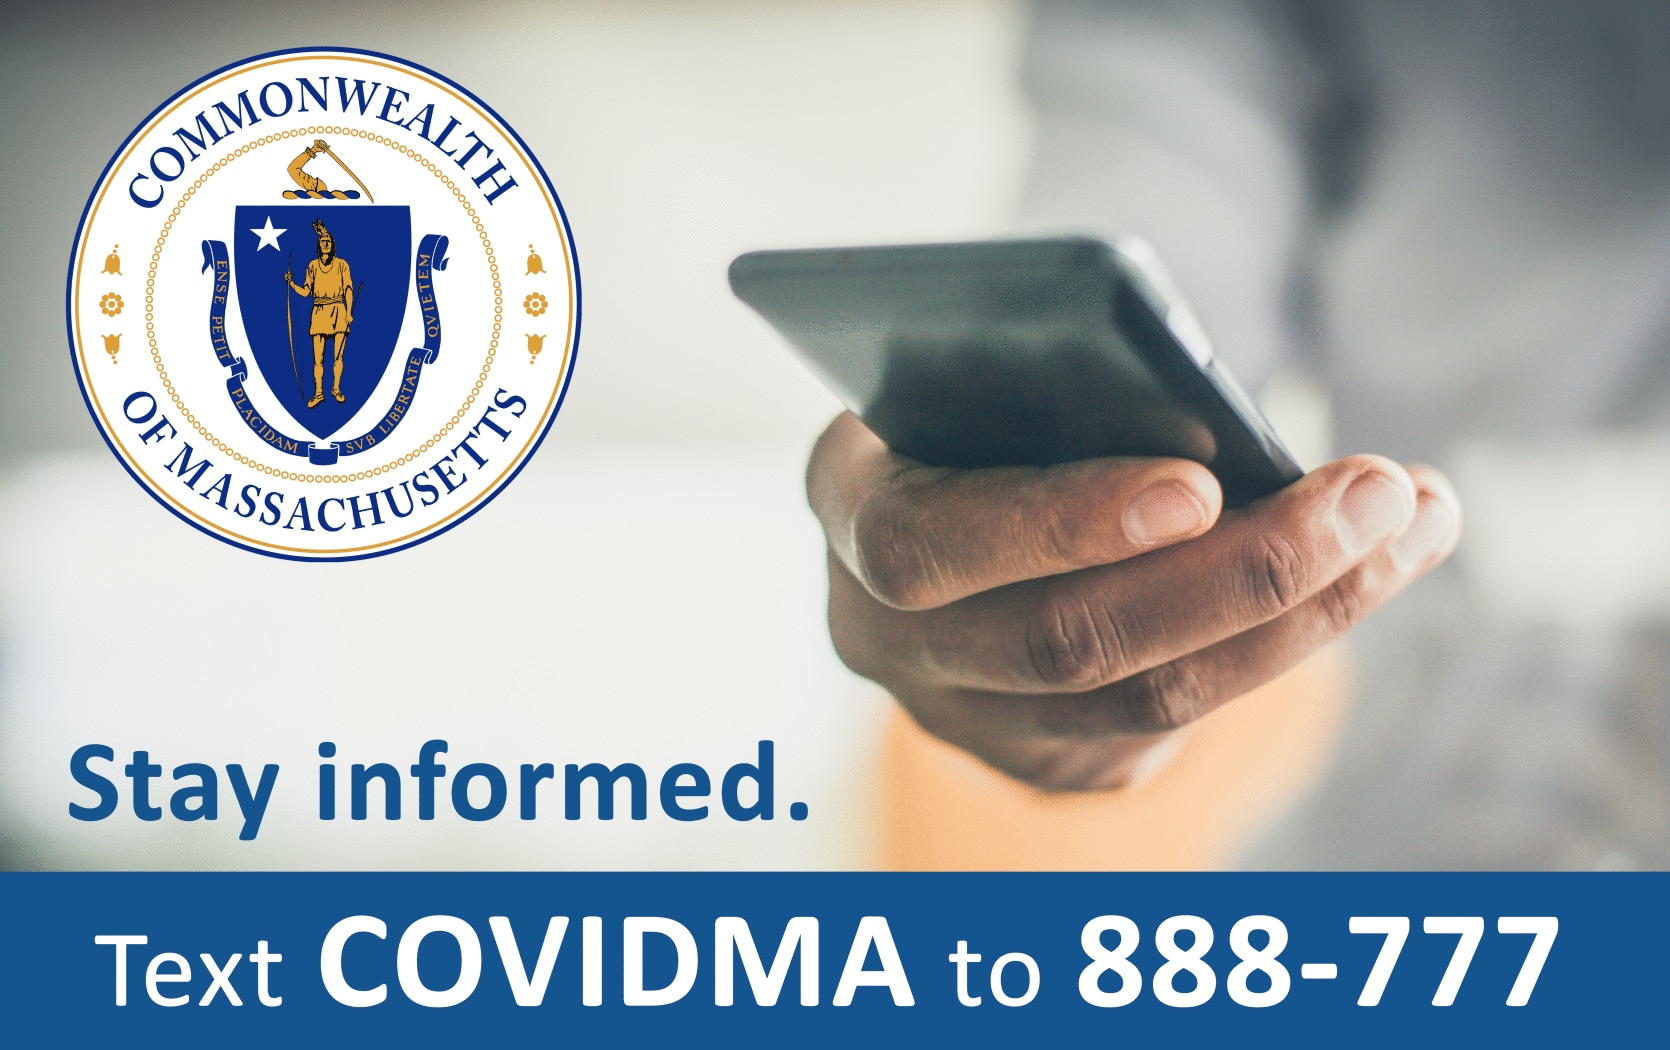 Stay informed. Text COVIDMA to 888-777.